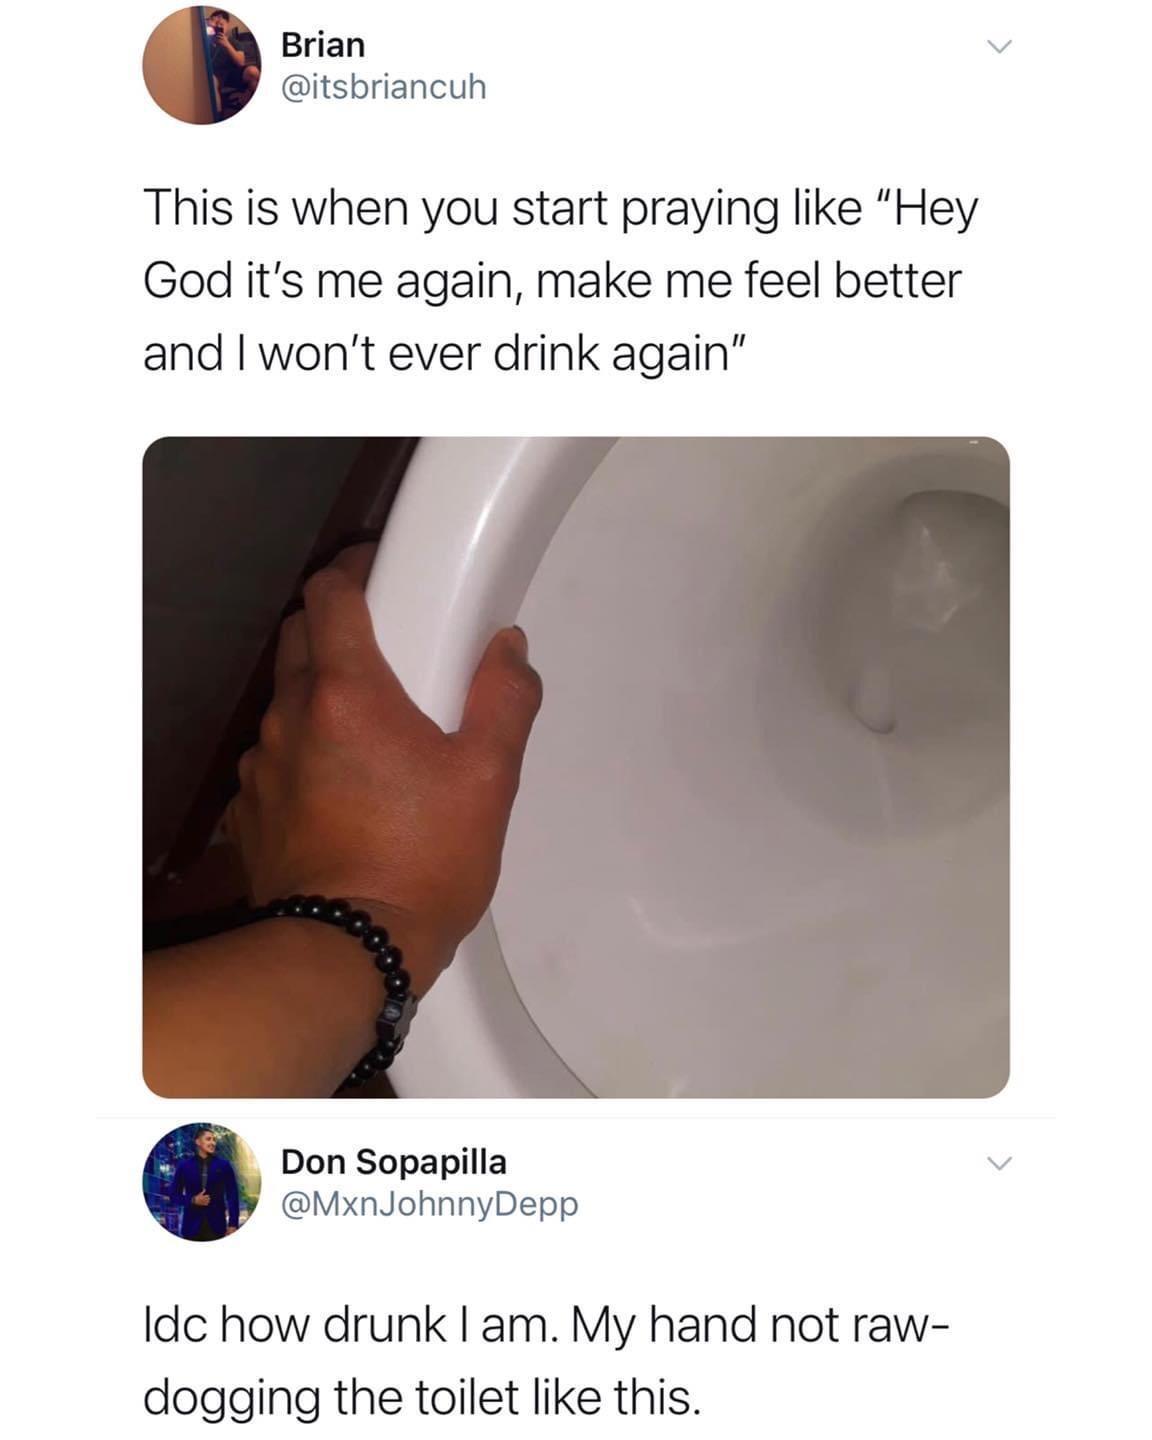 arm - Brian This is when you start praying "Hey God it's me again, make me feel better and I won't ever drink again" Don Sopapilla Depp Idc how drunk I am. My hand not raw dogging the toilet this.